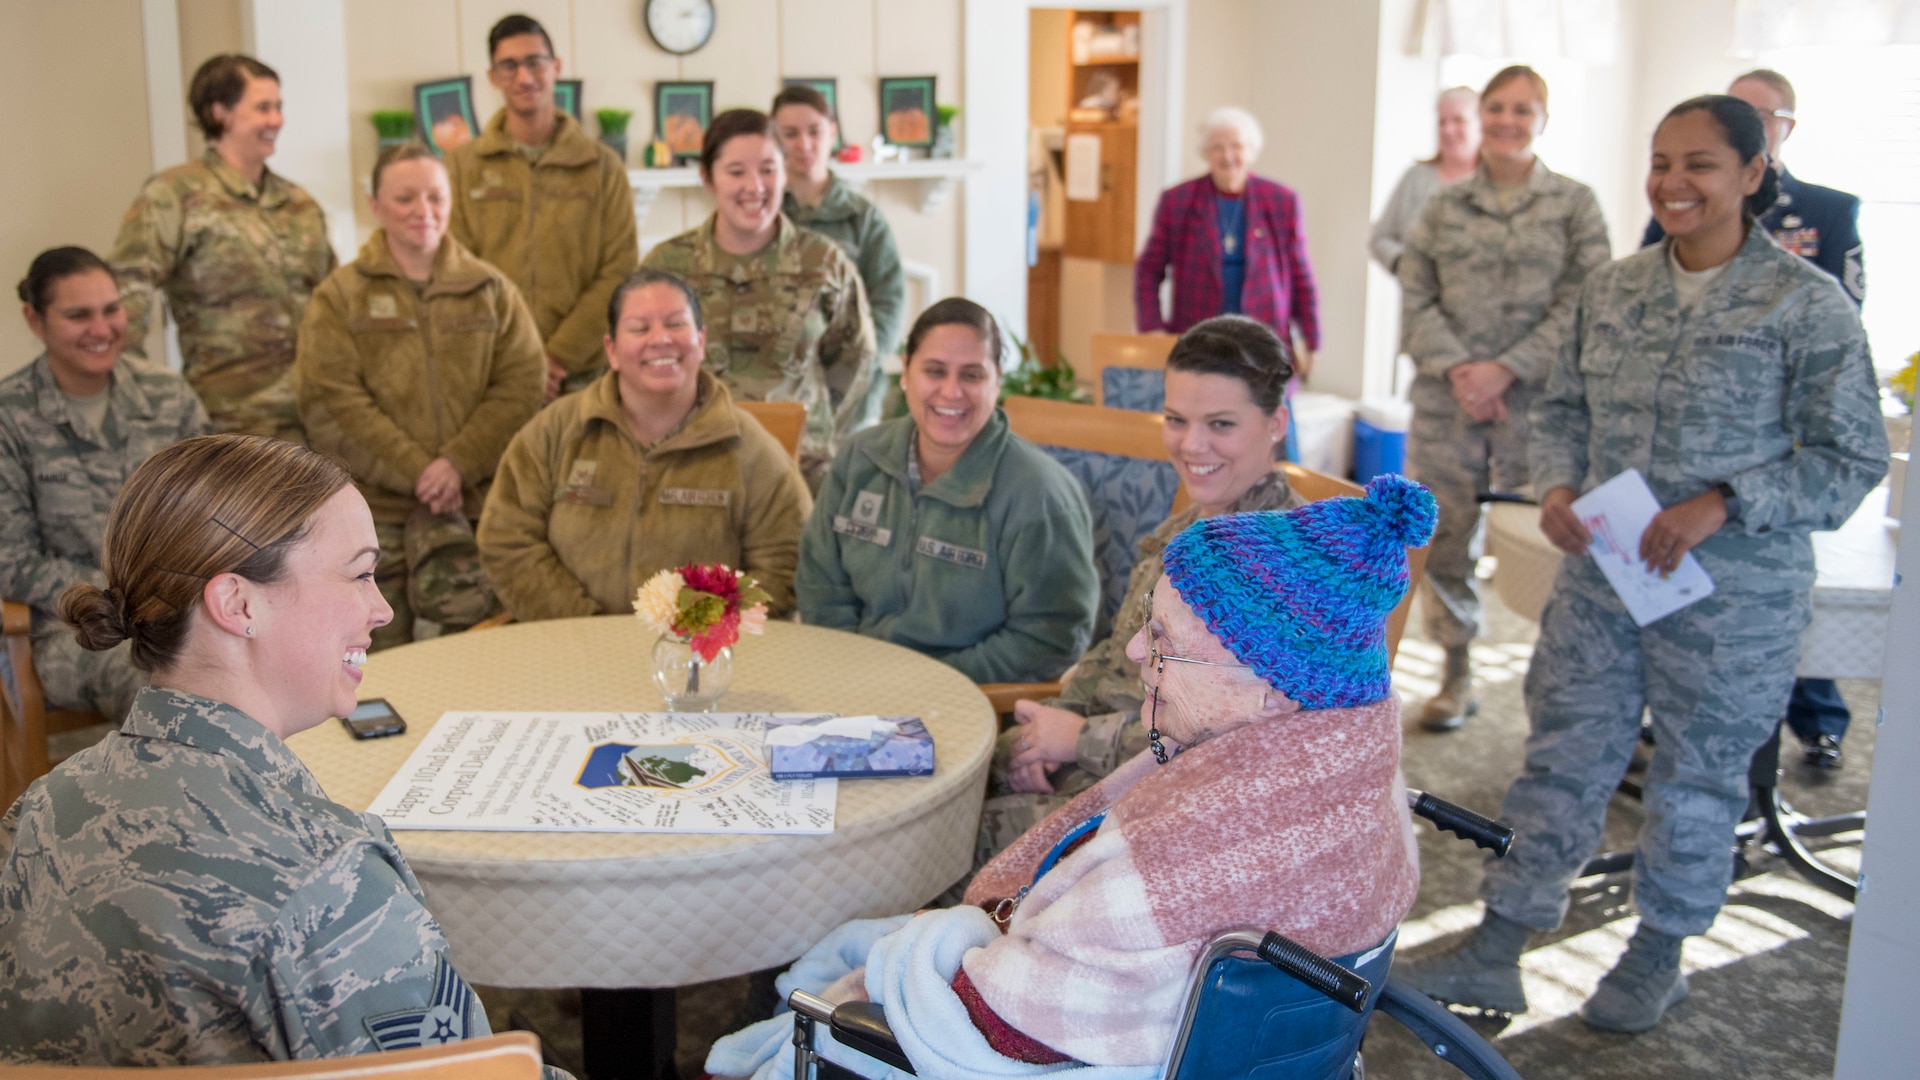 Airmen from the Massachusetts Air National Guard’s 102nd Intelligence Wing wish fellow Airman, U.S. Army Air Corps veteran Della Sassa a happy 102nd birthday at the Royal Cape Cod Nursing and Rehabilitation Center in Buzzards Bay, Mass., Nov. 8, 2019.